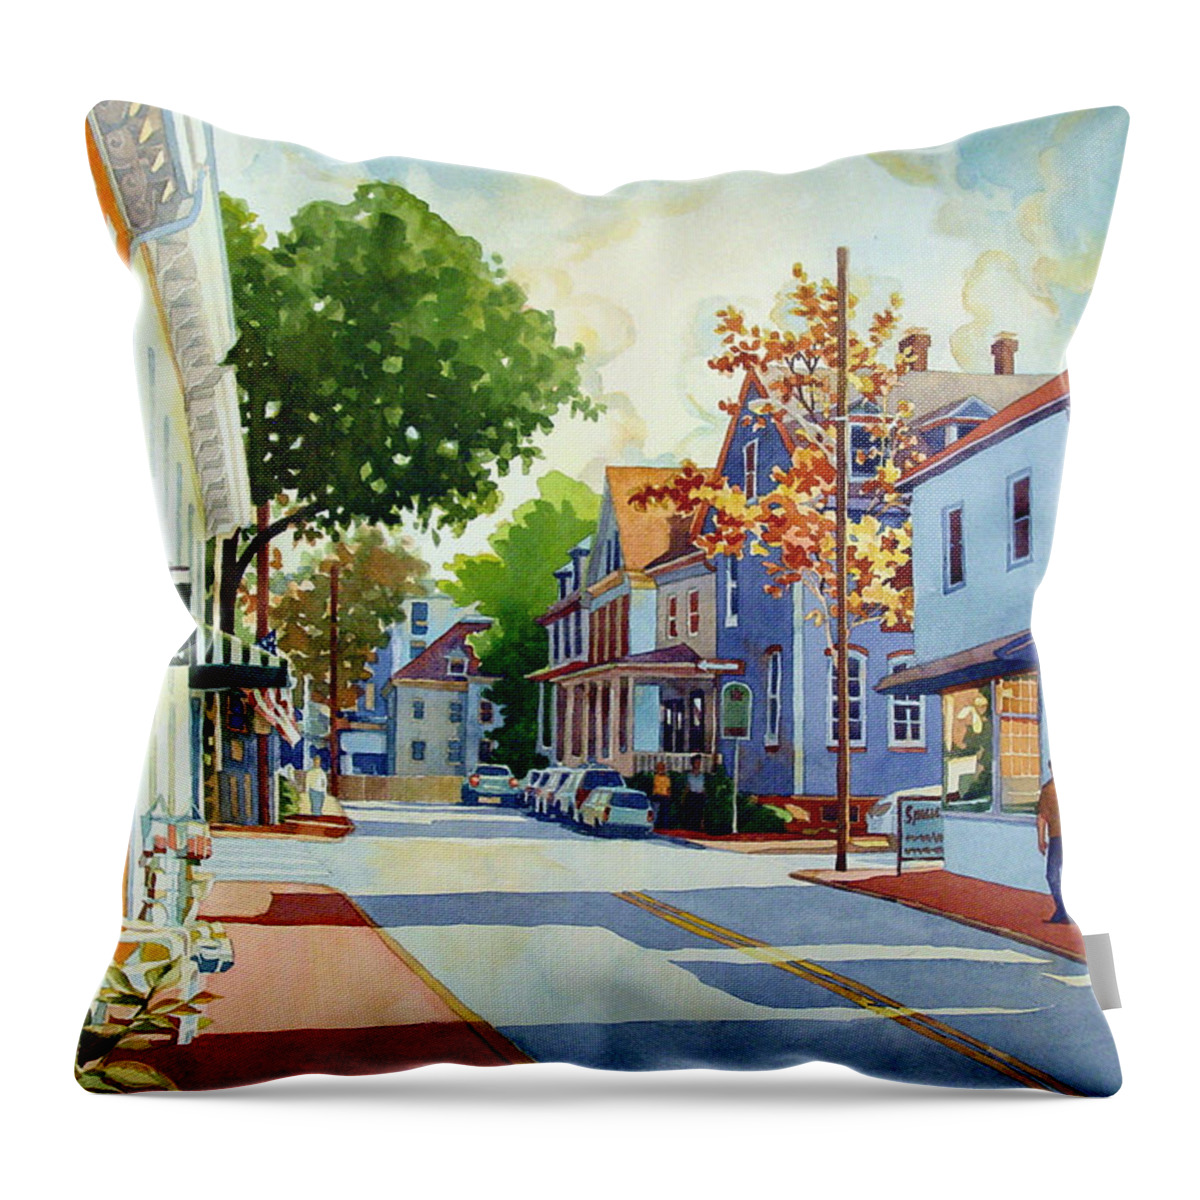 Watercolor Throw Pillow featuring the painting Intersection by Mick Williams